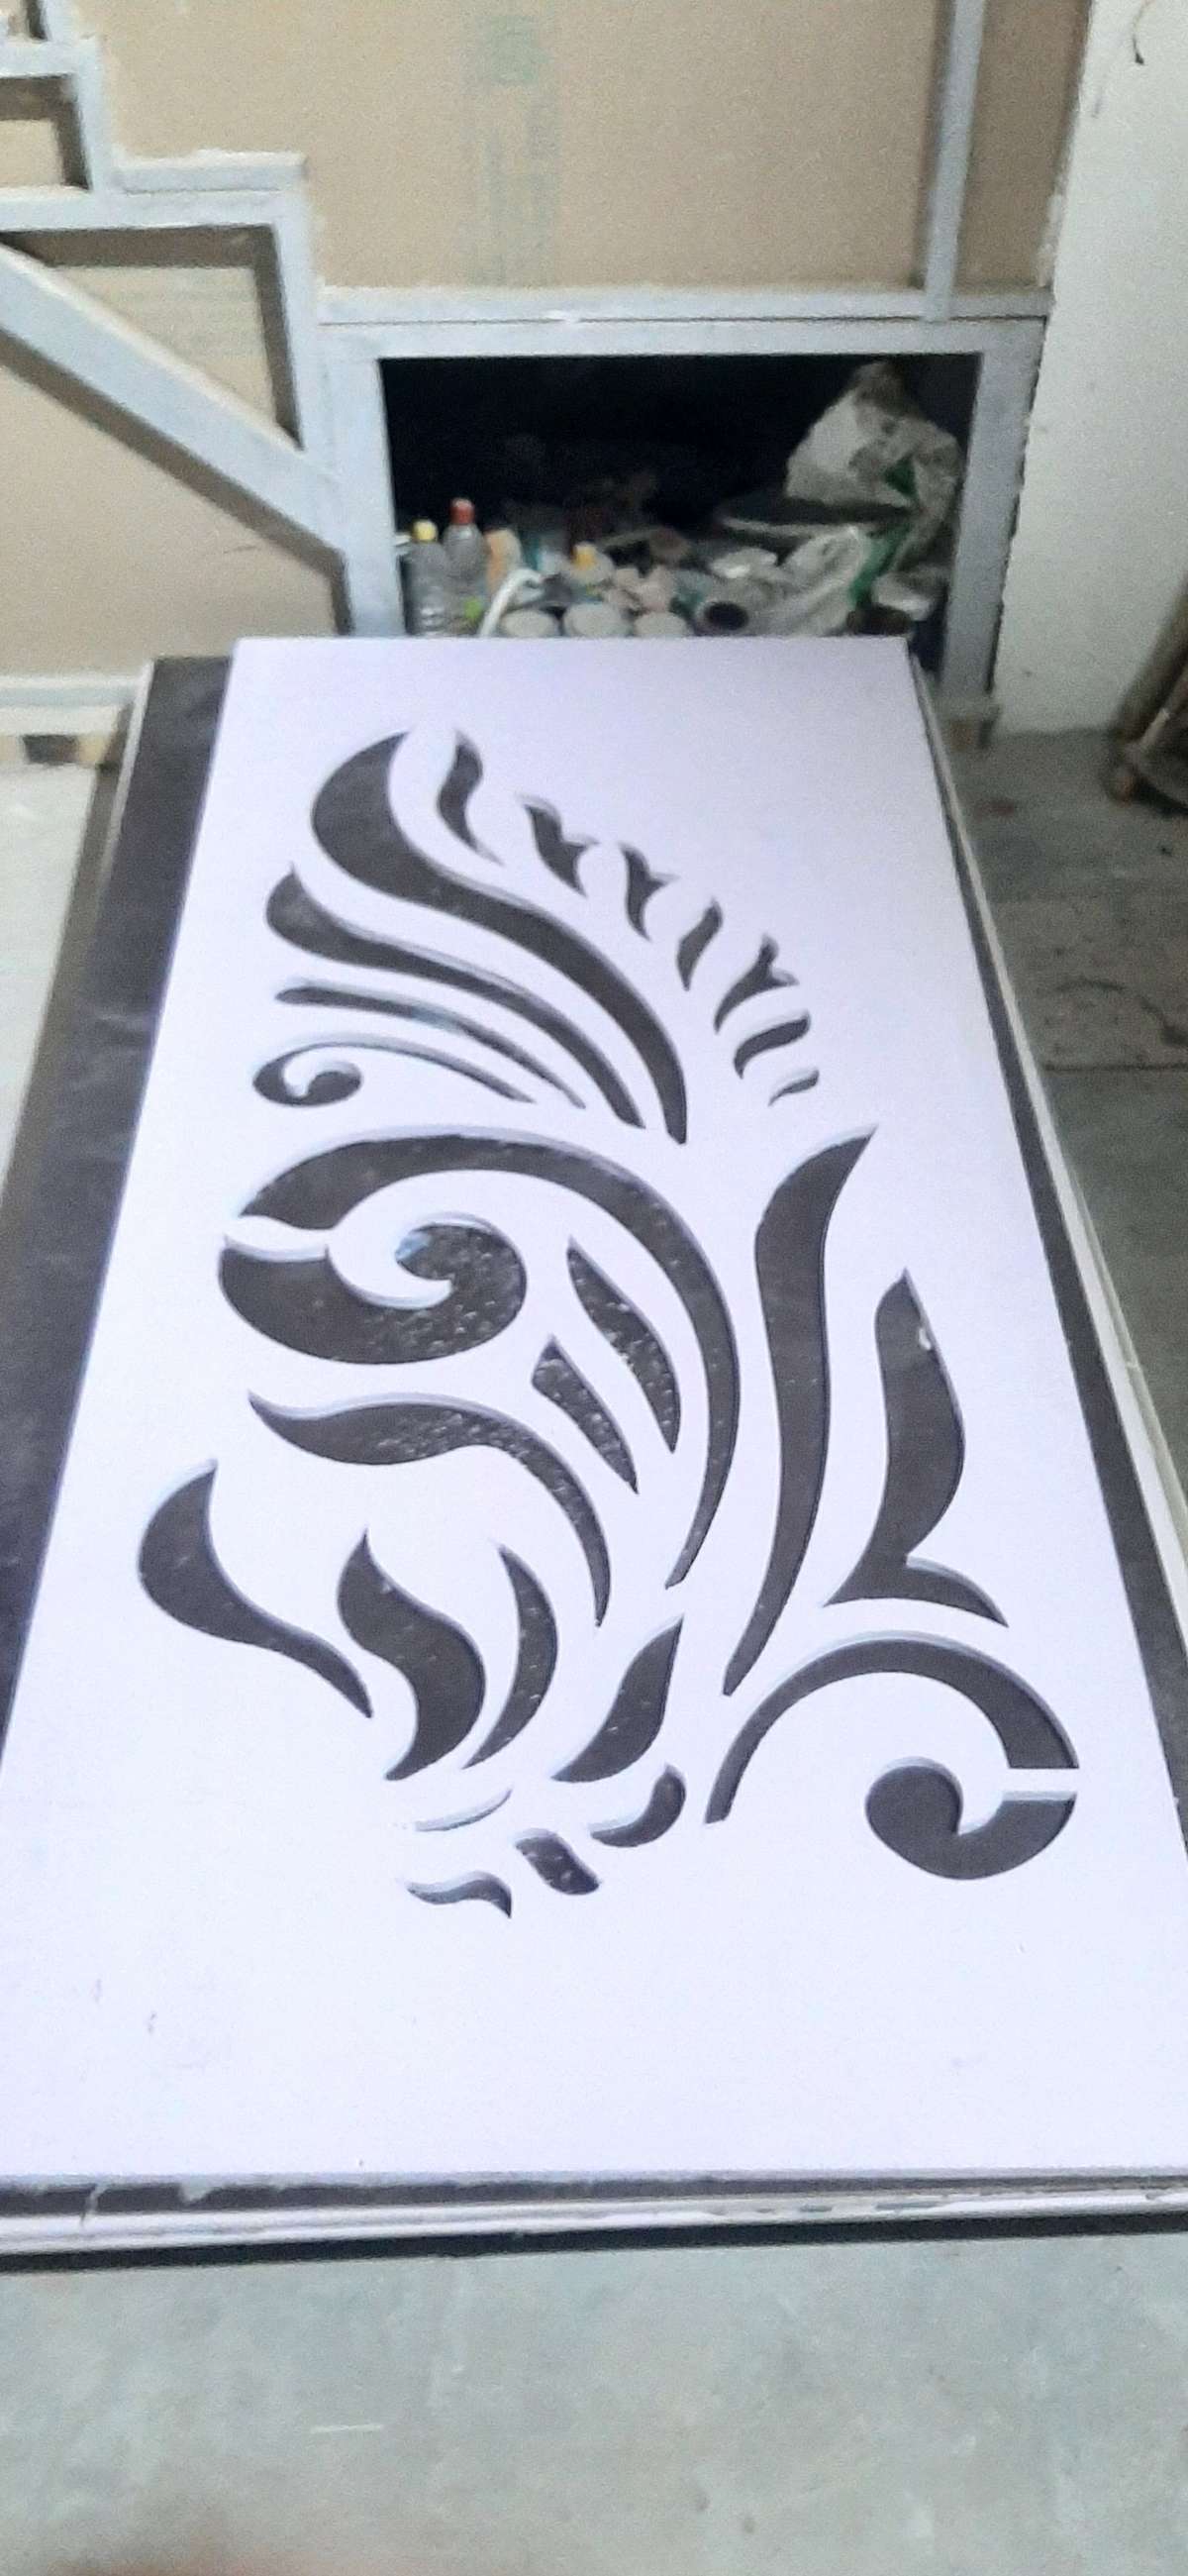 3d designs, engraving and CNC jali work